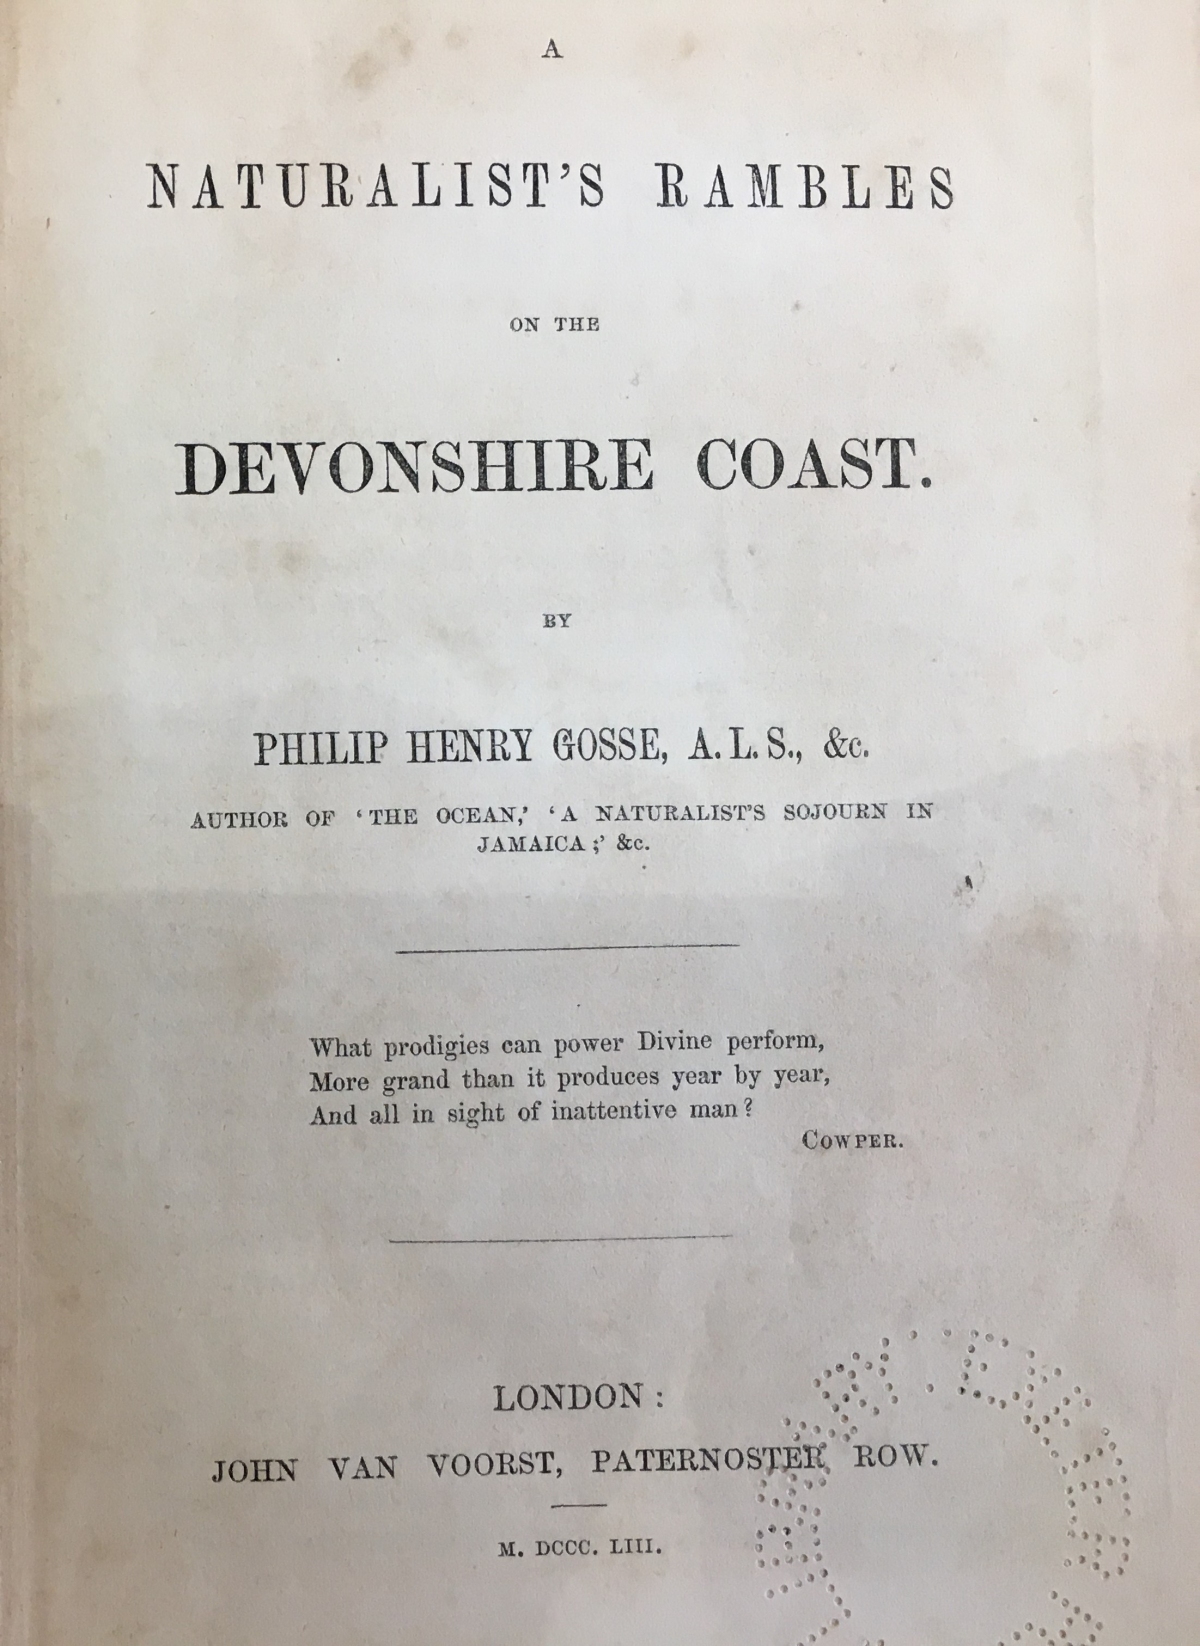 A Naturalist's Rambles on the Devonshire Coast, 1853.  The front page of a book Gosse wrote about the natural world.  It was all based on what he had seen on walks in Devon.  (Devon Heritage Centre: West Country Studies Library)